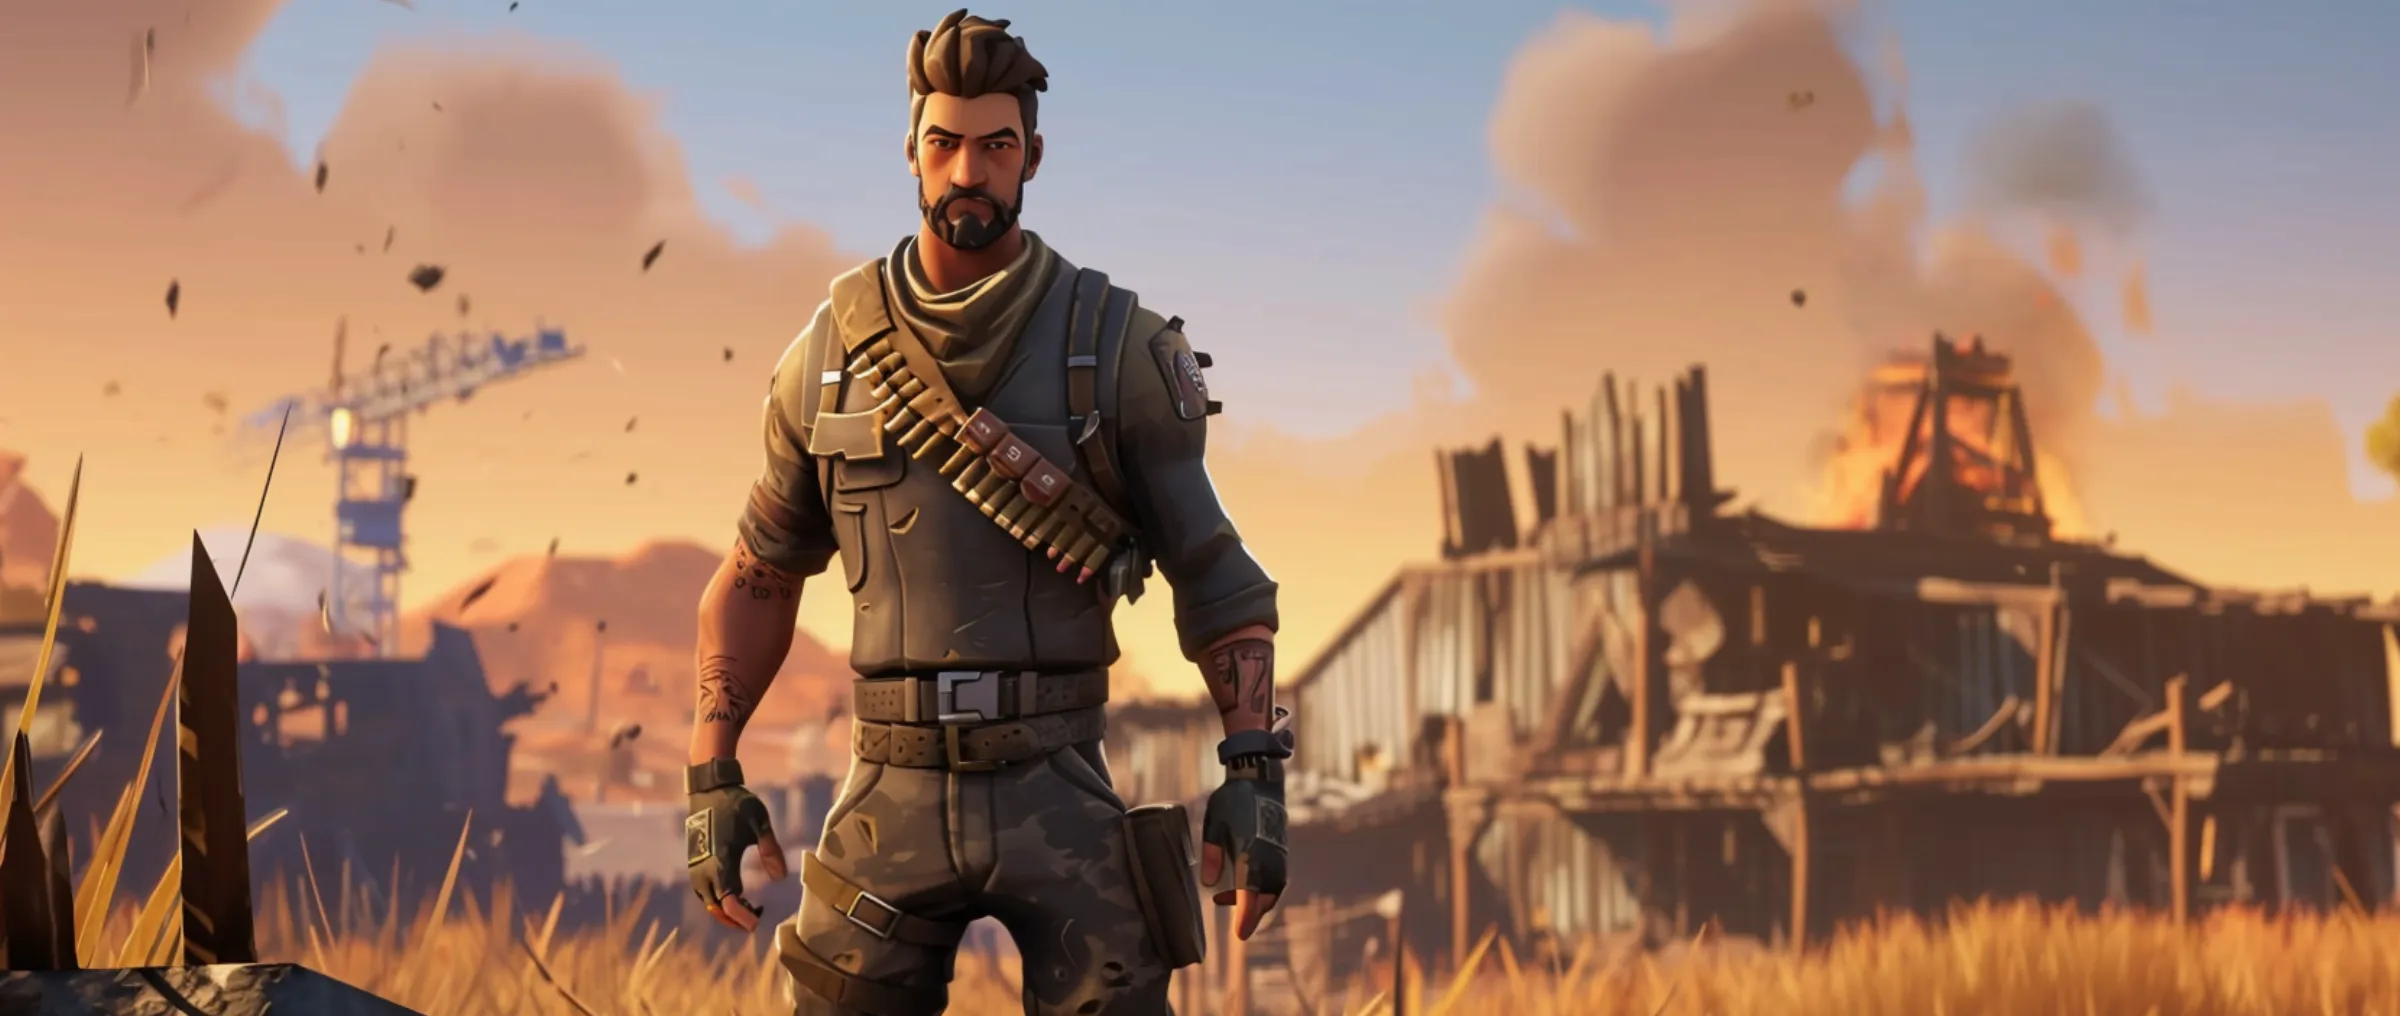 Epic Games' Fortnite Fallout: refund options after FTC settlement